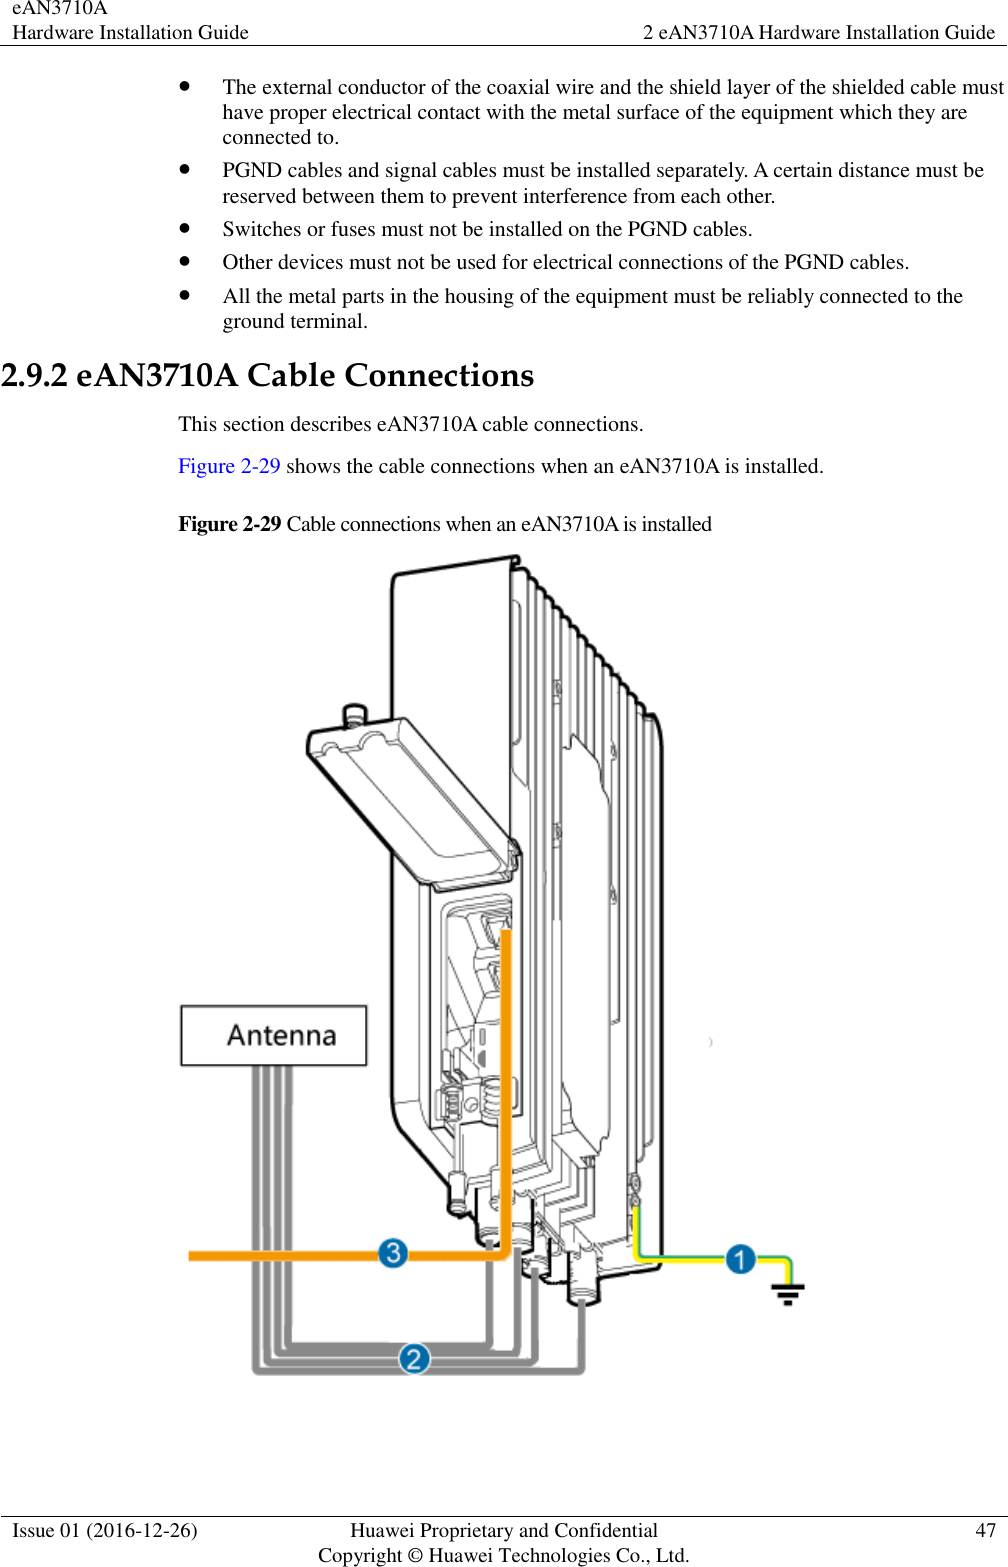 eAN3710A Hardware Installation Guide 2 eAN3710A Hardware Installation Guide  Issue 01 (2016-12-26) Huawei Proprietary and Confidential                                     Copyright © Huawei Technologies Co., Ltd. 47   The external conductor of the coaxial wire and the shield layer of the shielded cable must have proper electrical contact with the metal surface of the equipment which they are connected to.  PGND cables and signal cables must be installed separately. A certain distance must be reserved between them to prevent interference from each other.  Switches or fuses must not be installed on the PGND cables.  Other devices must not be used for electrical connections of the PGND cables.  All the metal parts in the housing of the equipment must be reliably connected to the ground terminal. 2.9.2 eAN3710A Cable Connections This section describes eAN3710A cable connections. Figure 2-29 shows the cable connections when an eAN3710A is installed. Figure 2-29 Cable connections when an eAN3710A is installed     